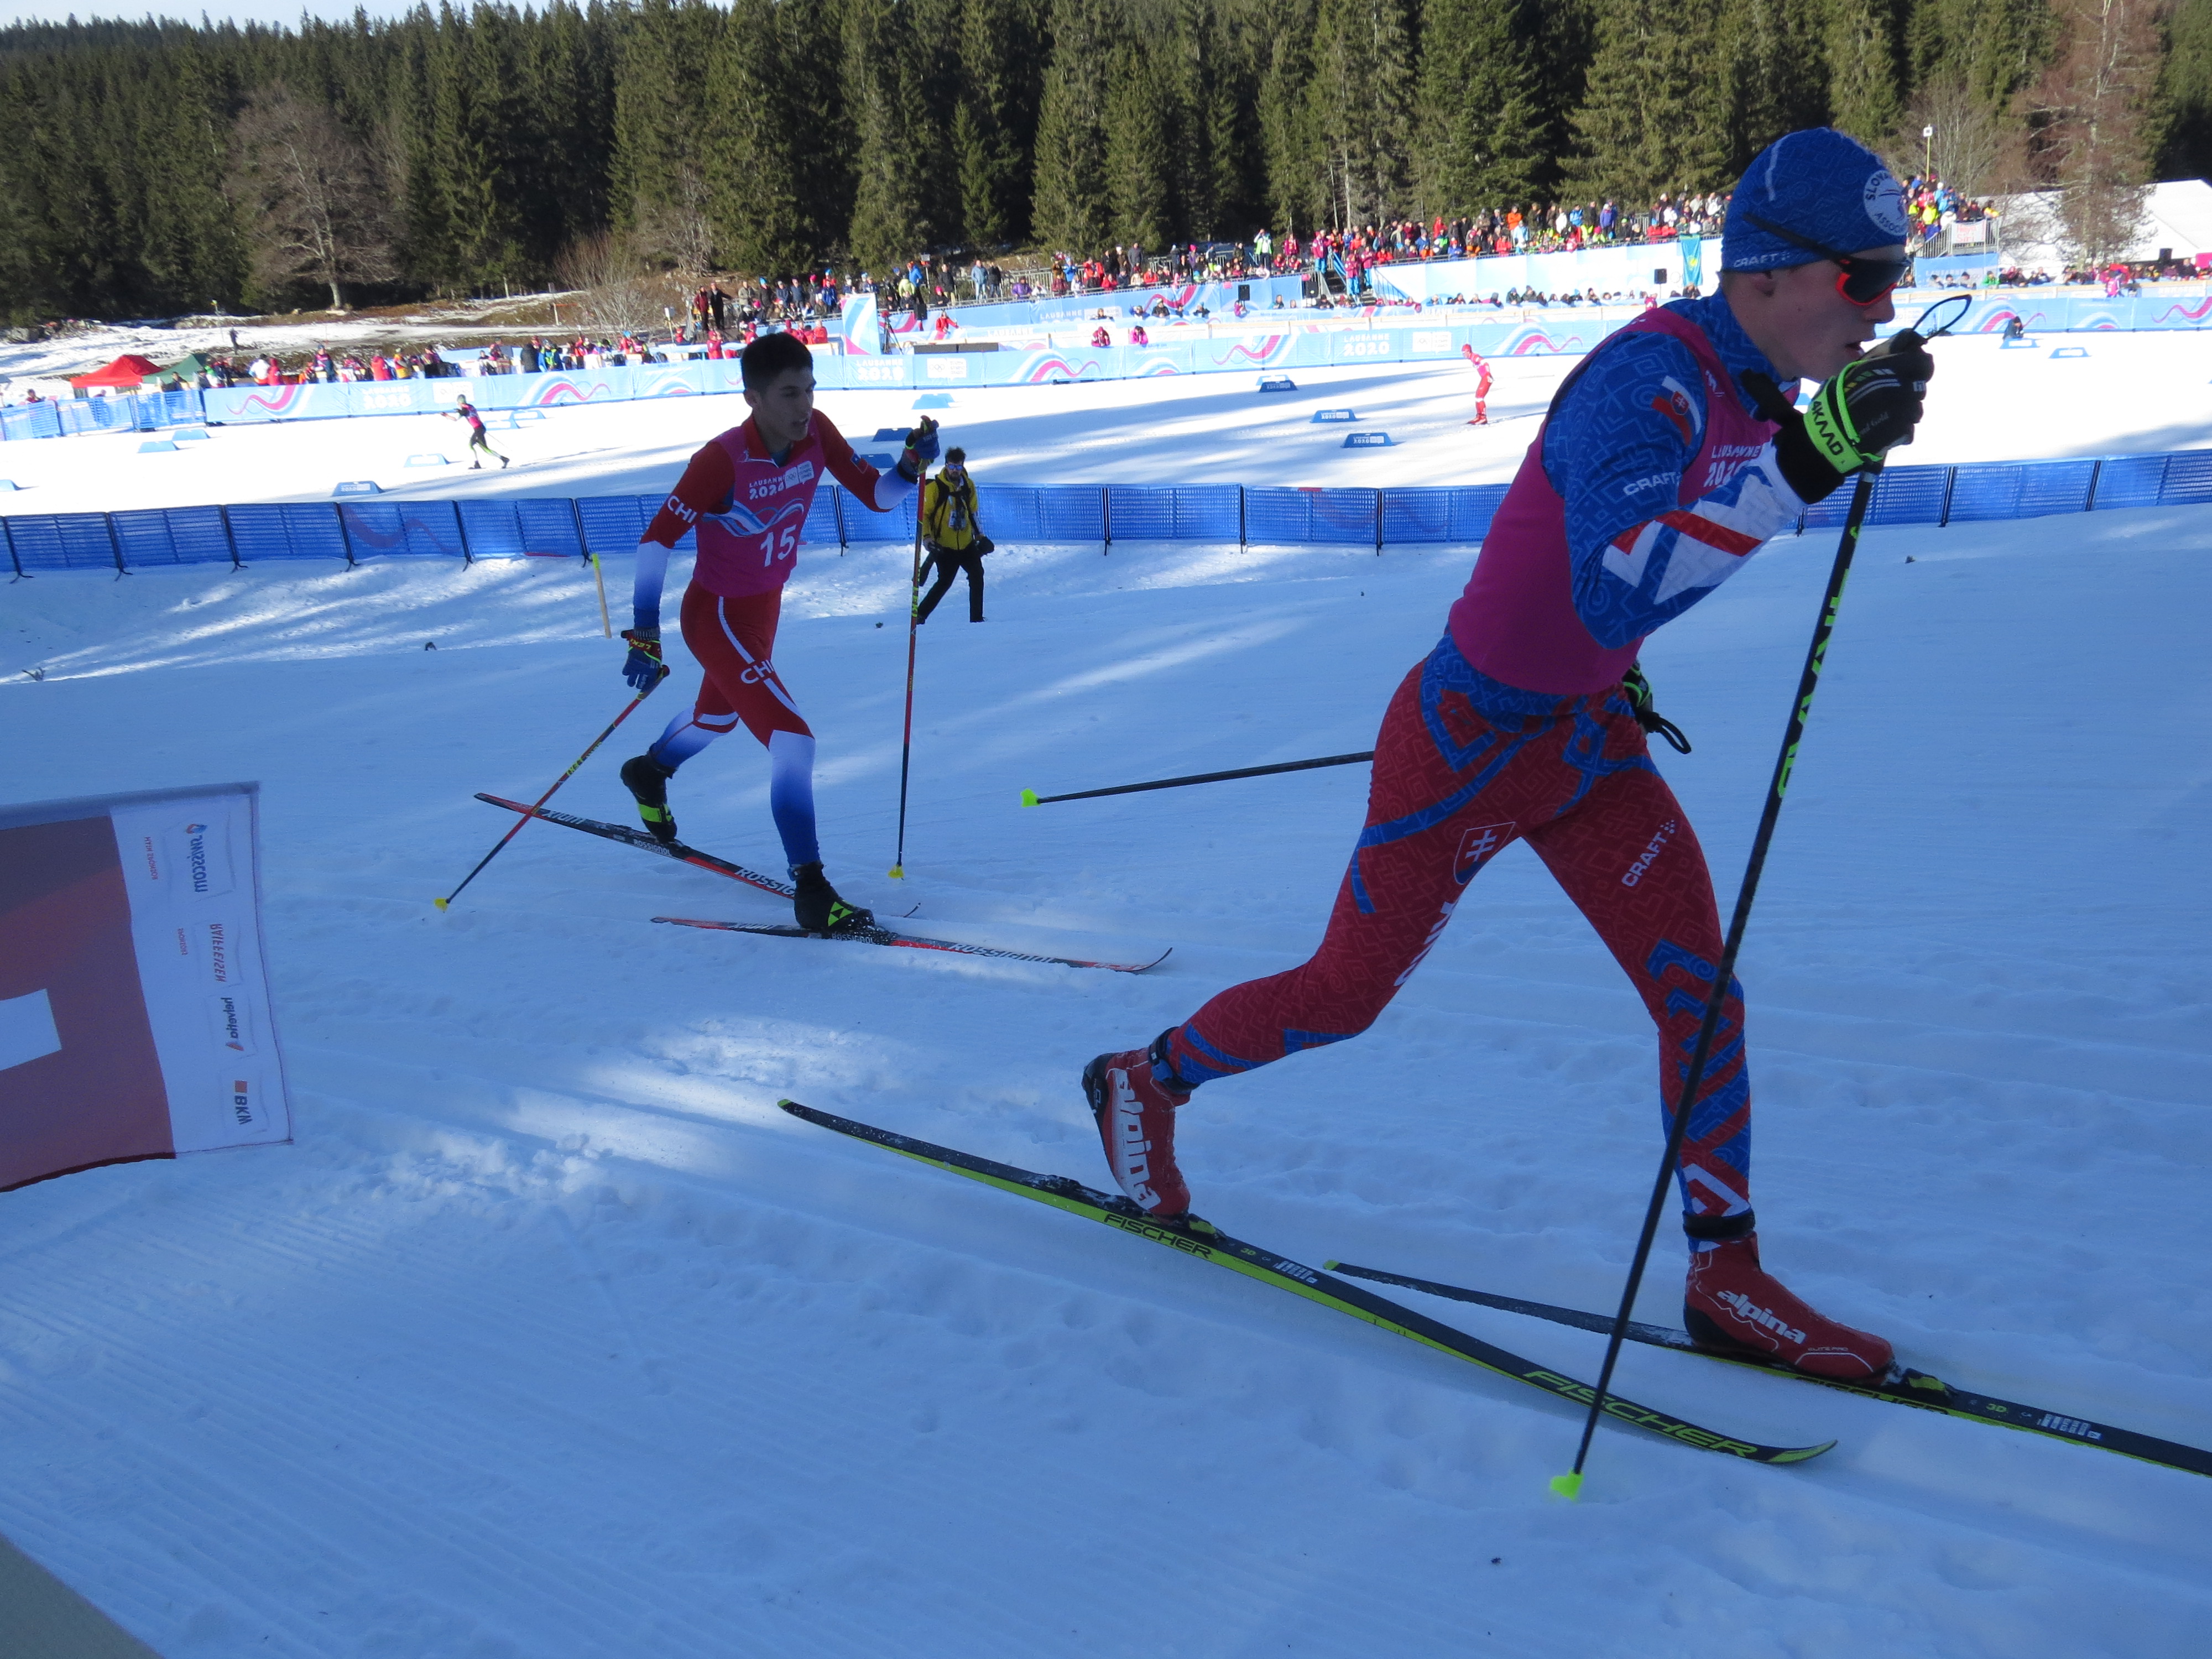 File:Cross-country skiing at the 2020 Winter Youth Olympics - 21 January 2020 - 71.jpg - Wikimedia Commons